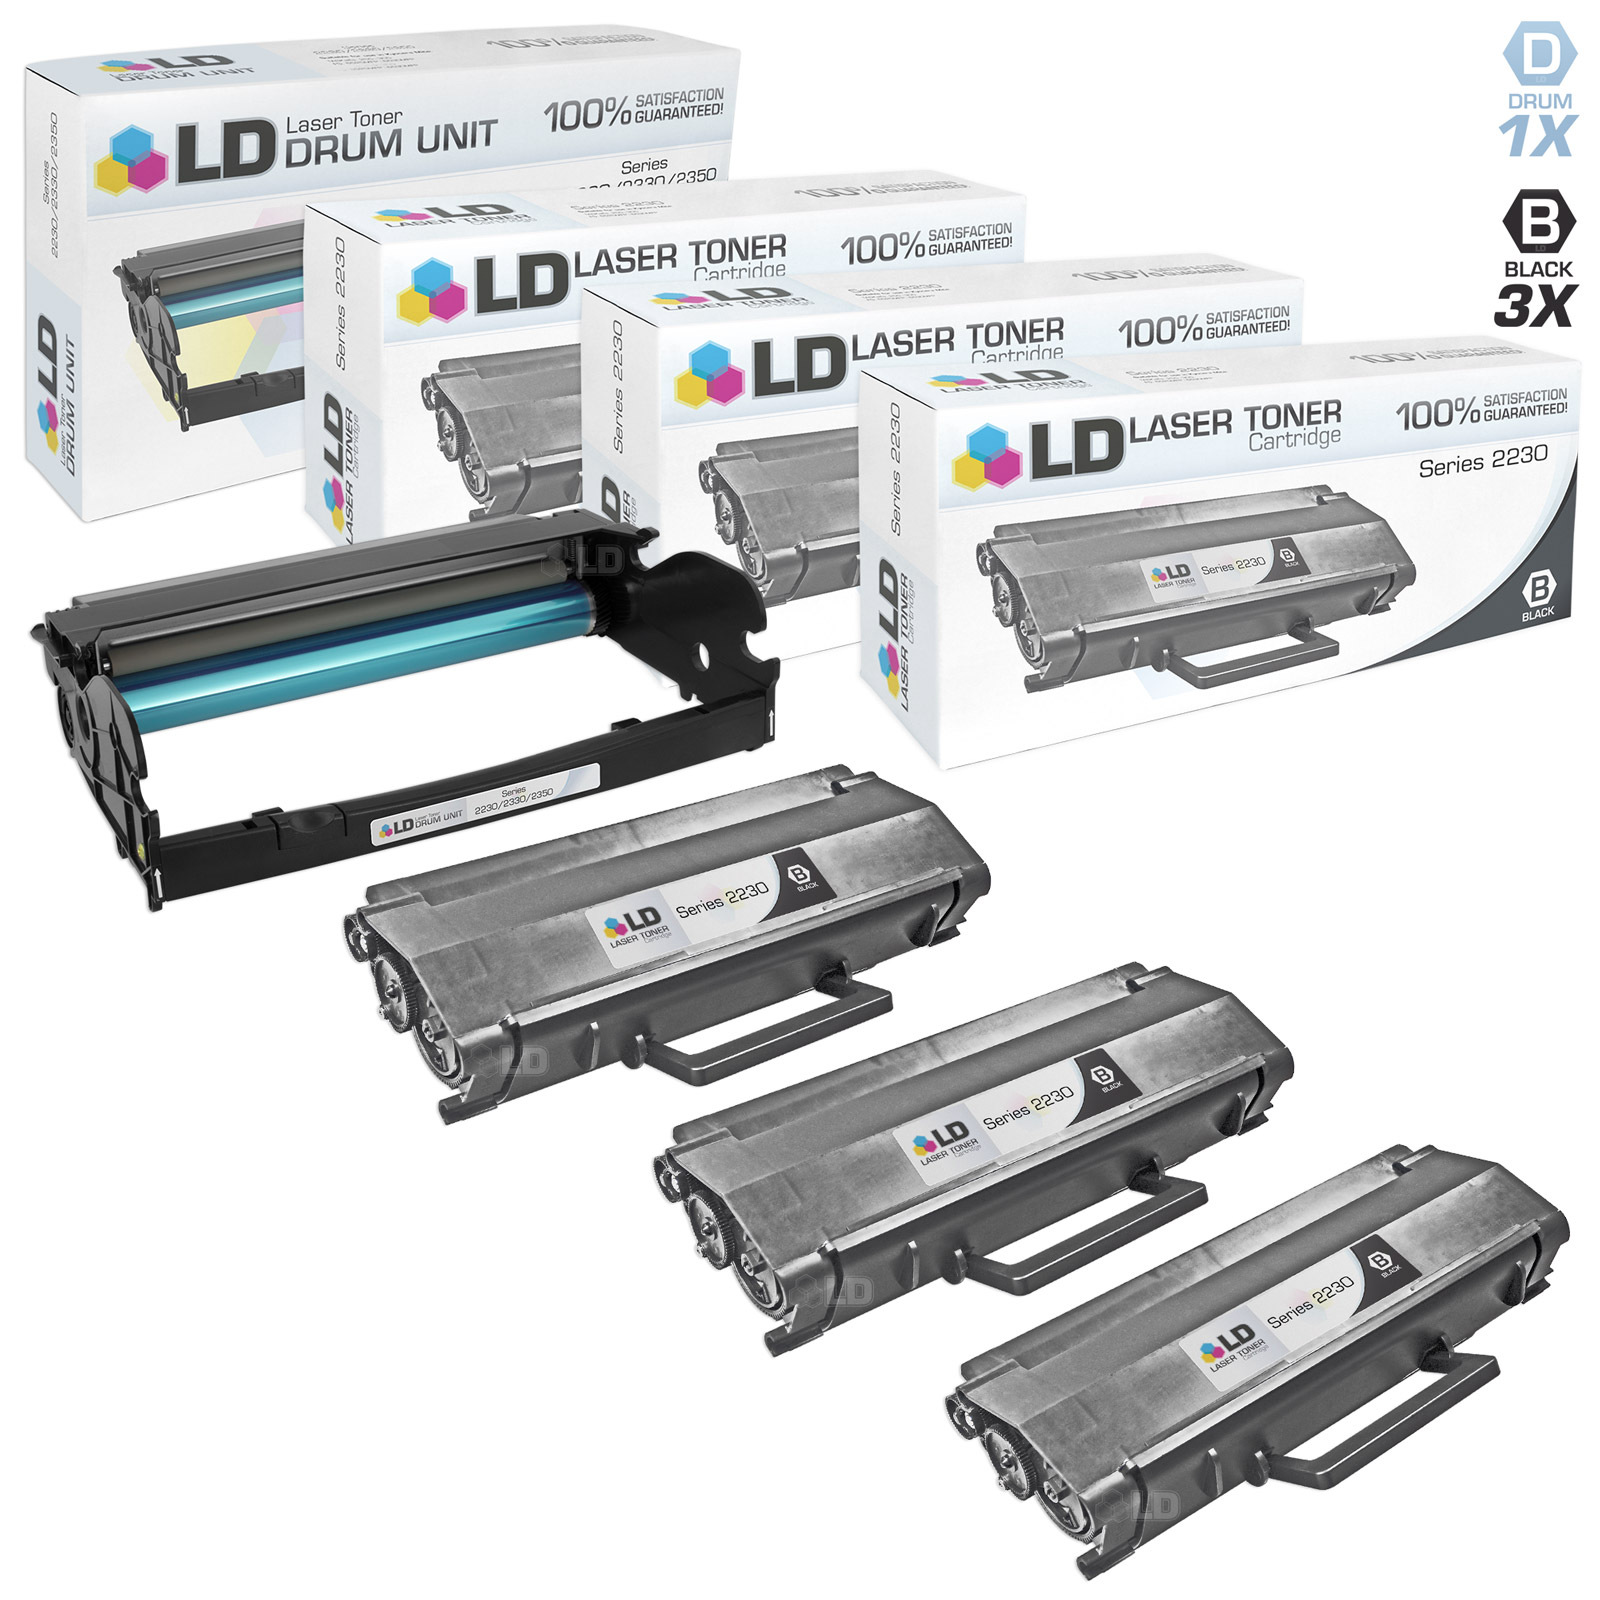 Remanufactured Toner Cartridge & Black Unit Replacements for Dell 330-4131 & 330-2663 (3 Toners, 1 Black) - image 1 of 6